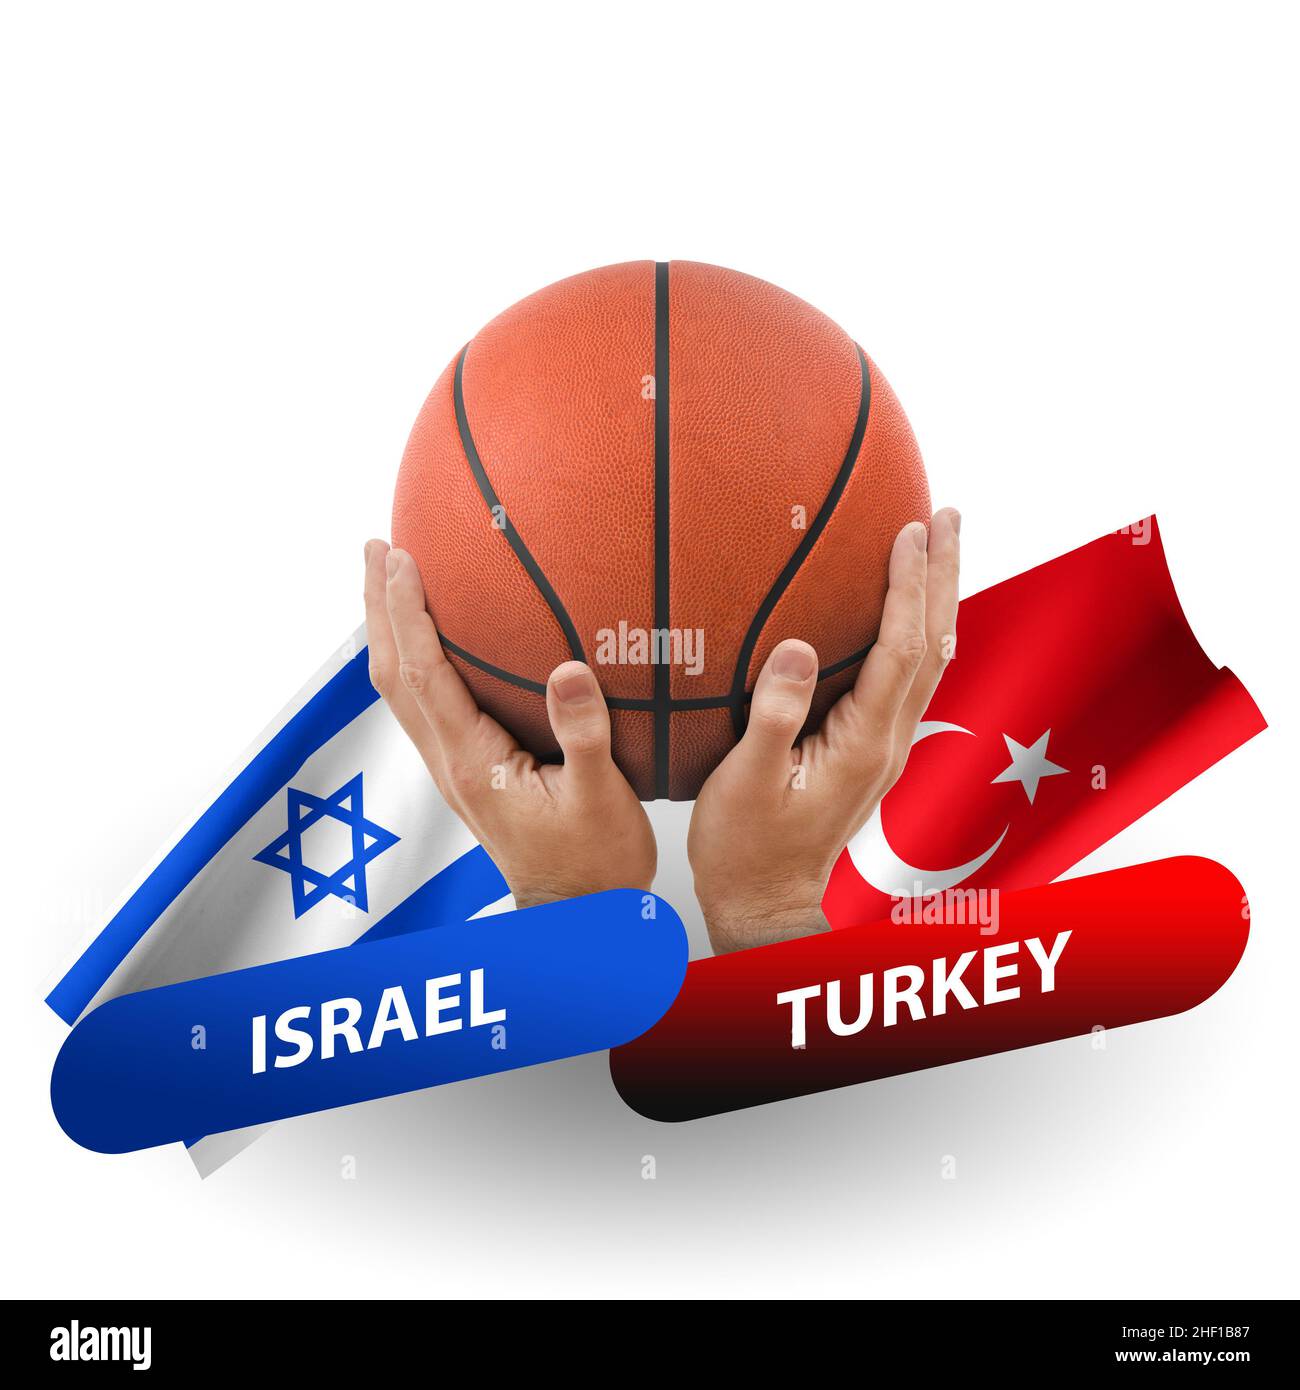 Basketball competition match, national teams israel vs turkey Stock Photo